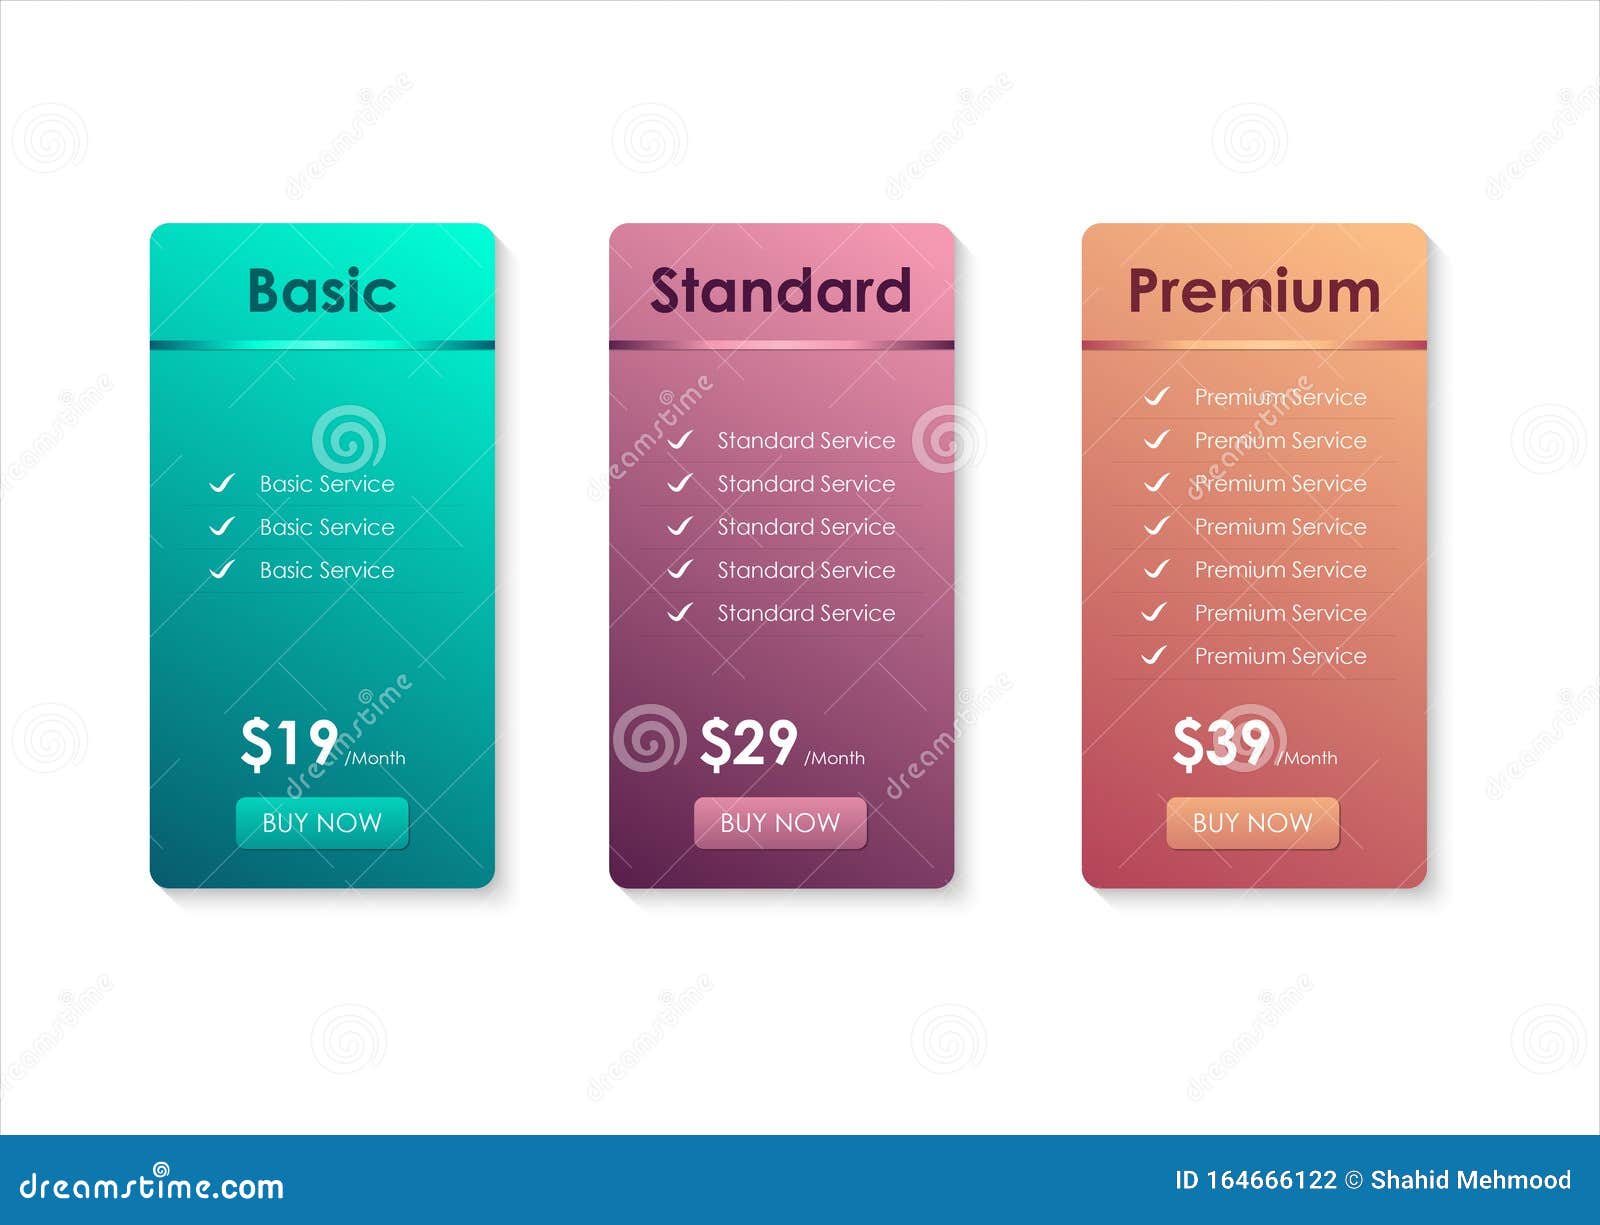 Price Comparison Table, Pricing Table Template For Website, Stock Vector - Illustration of ...